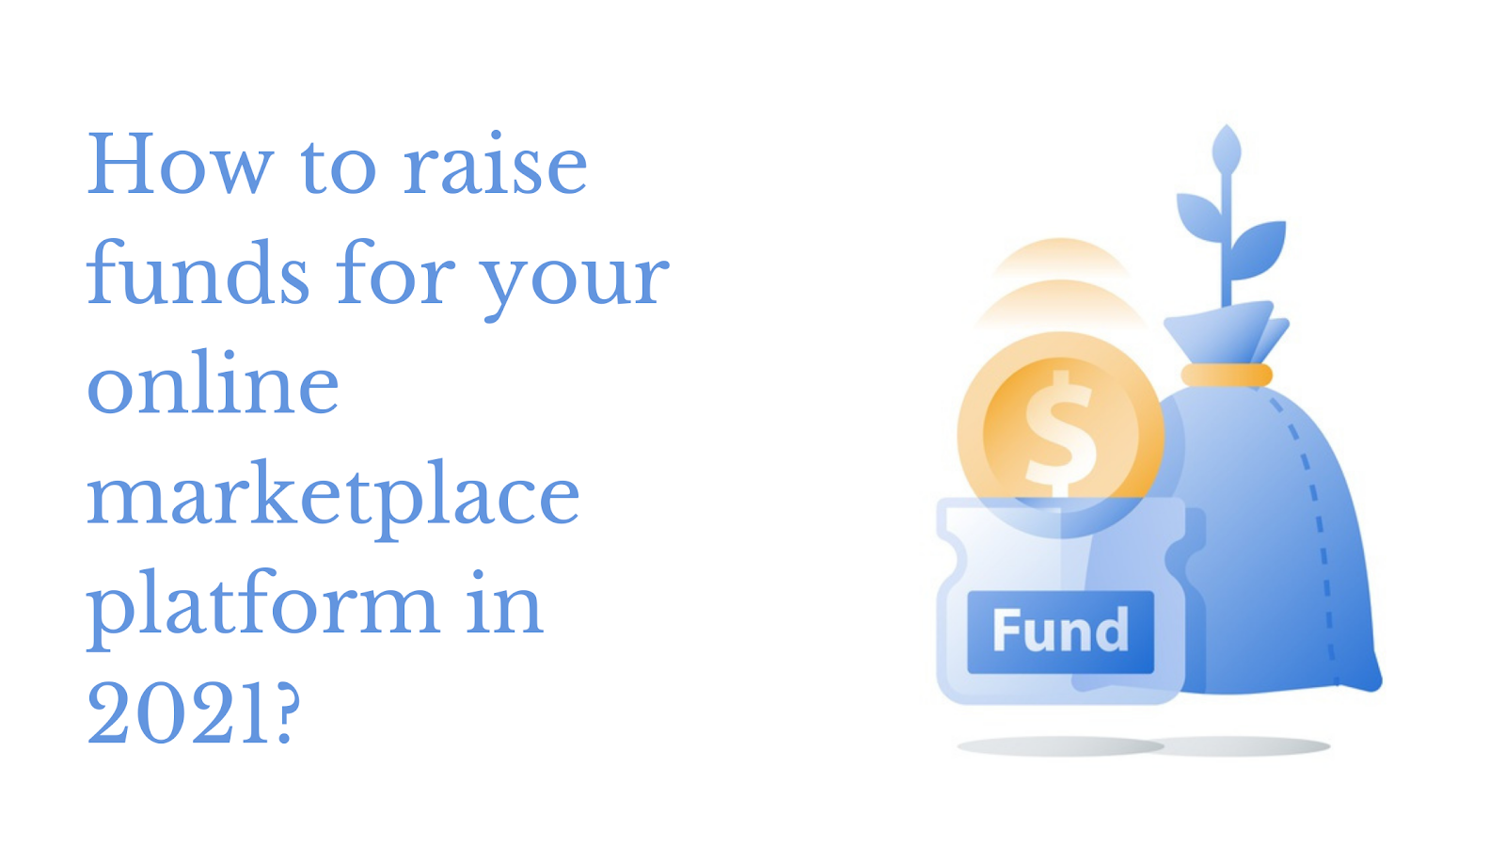 How to Raise Funds for Your Online Marketplace Platform in 2021 - Yelo